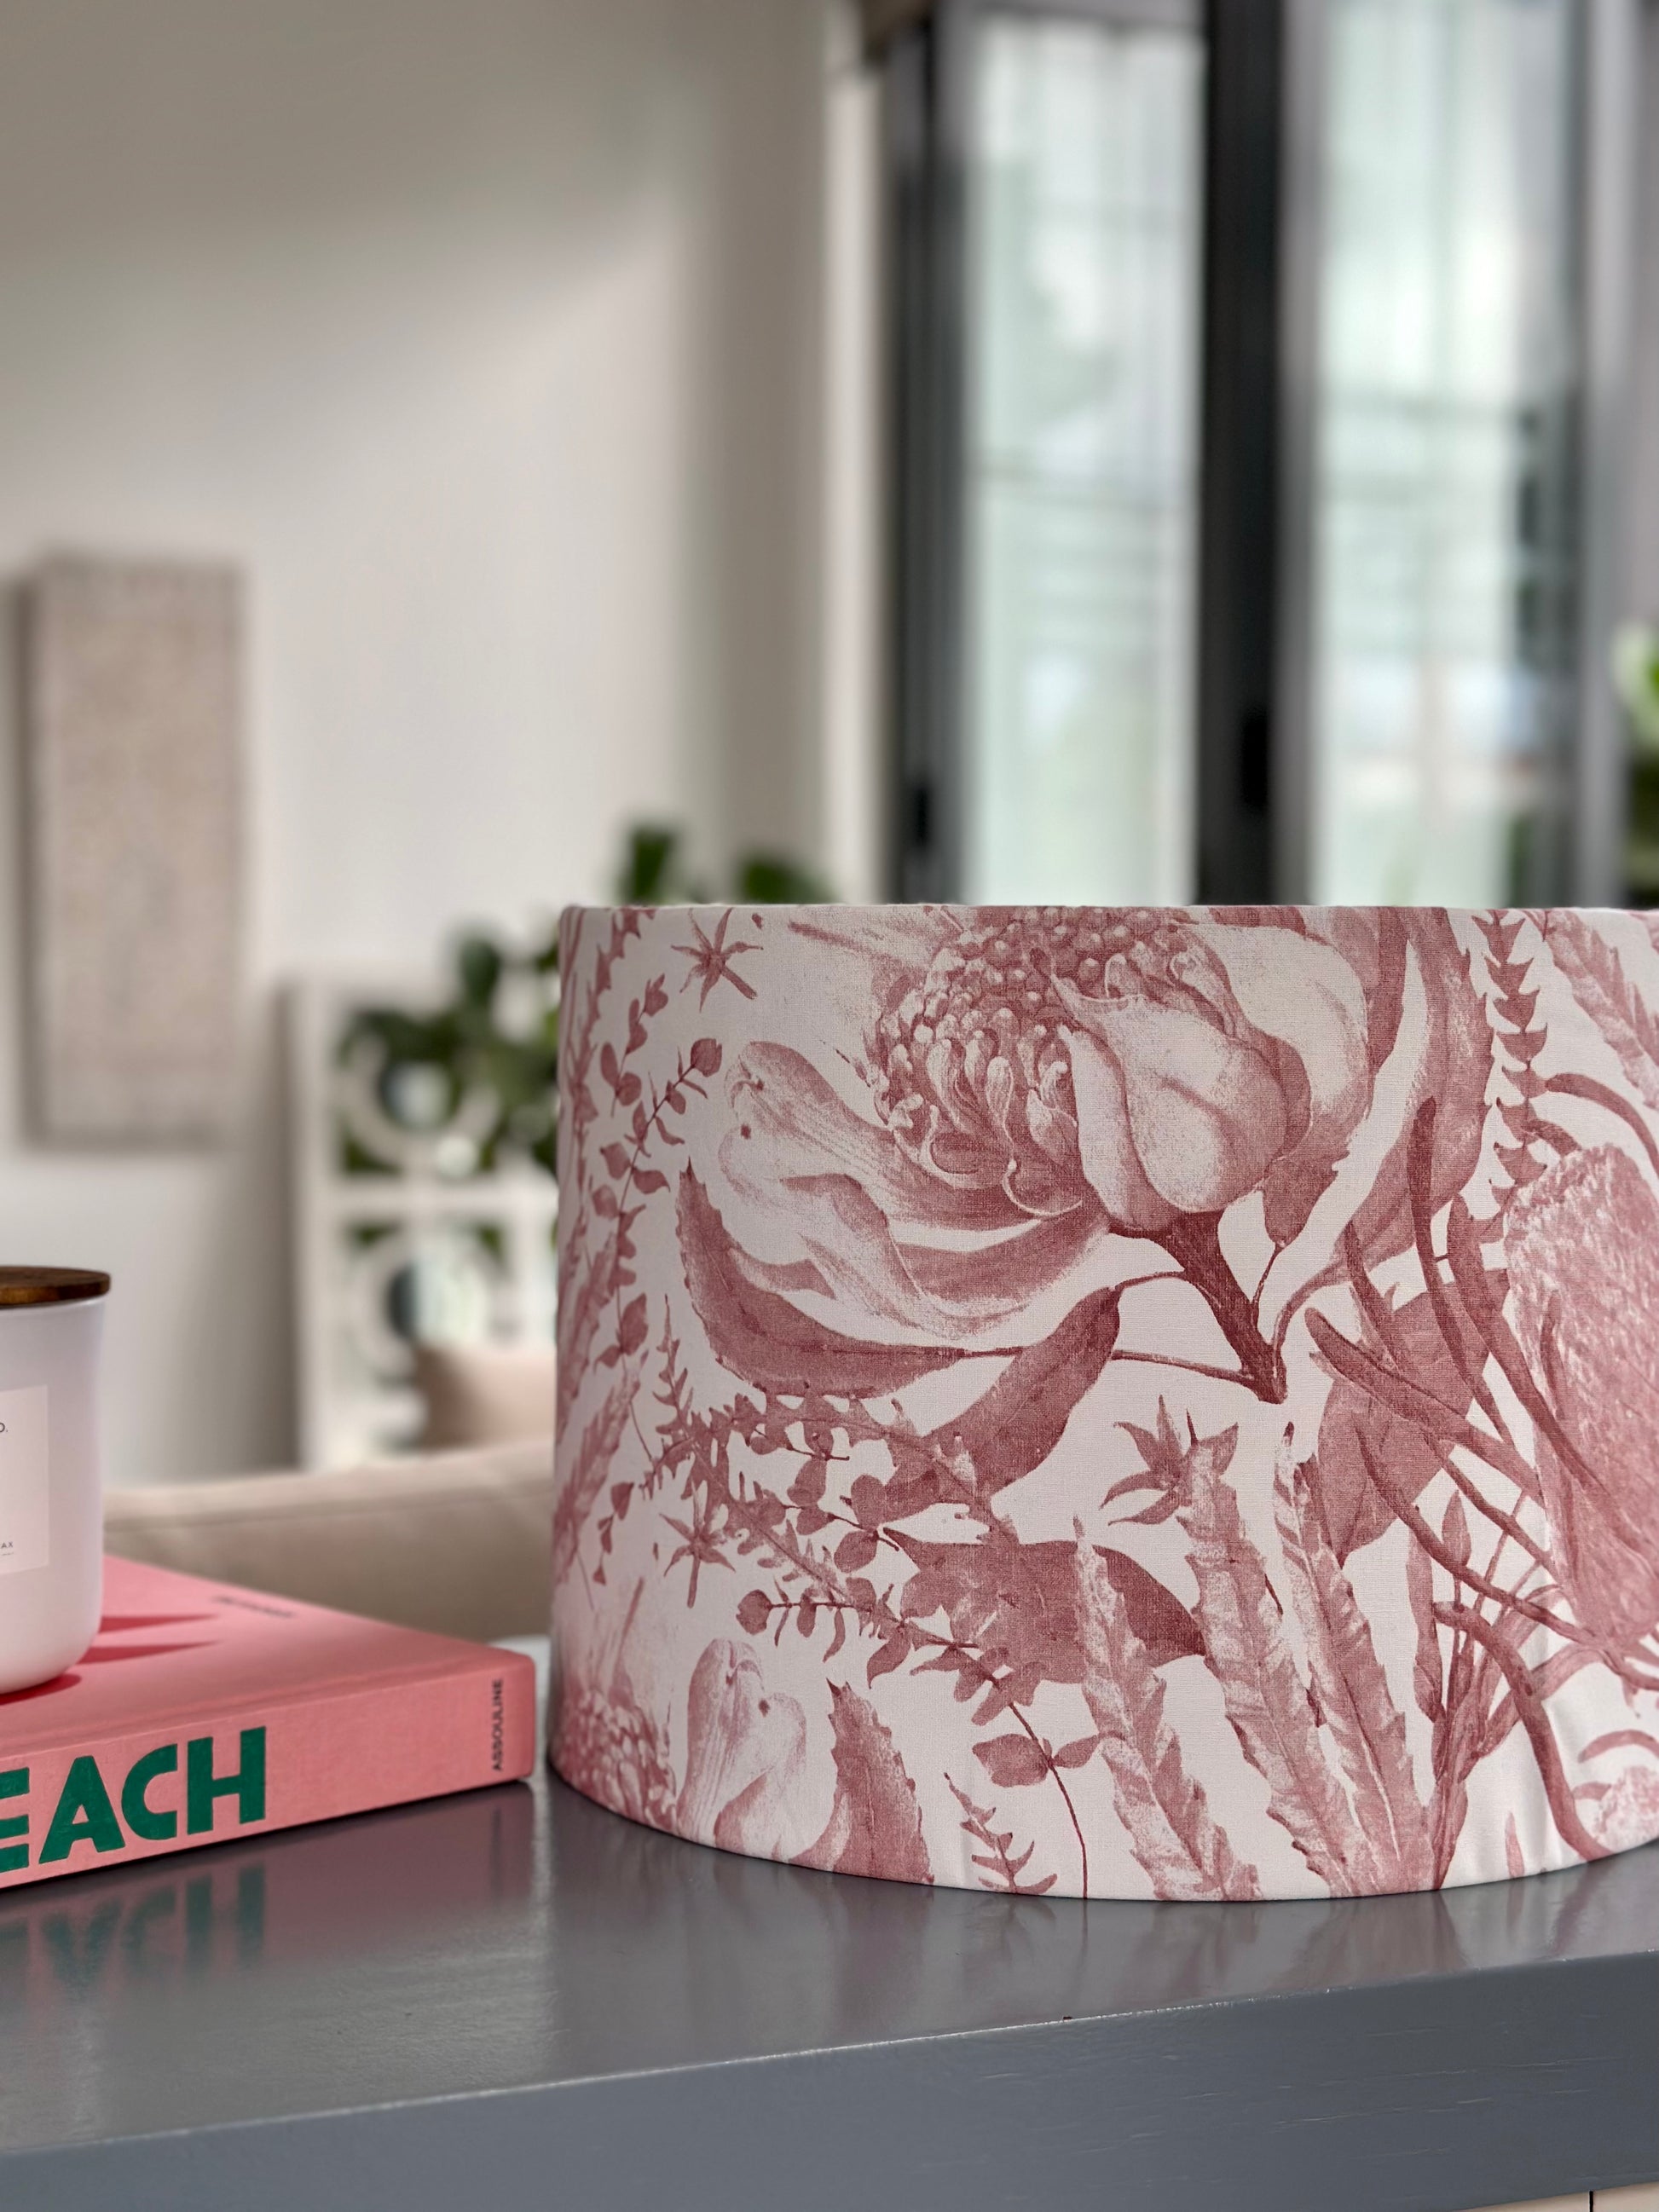 Handmade fabric lampshade Singapore with pink floral pattern